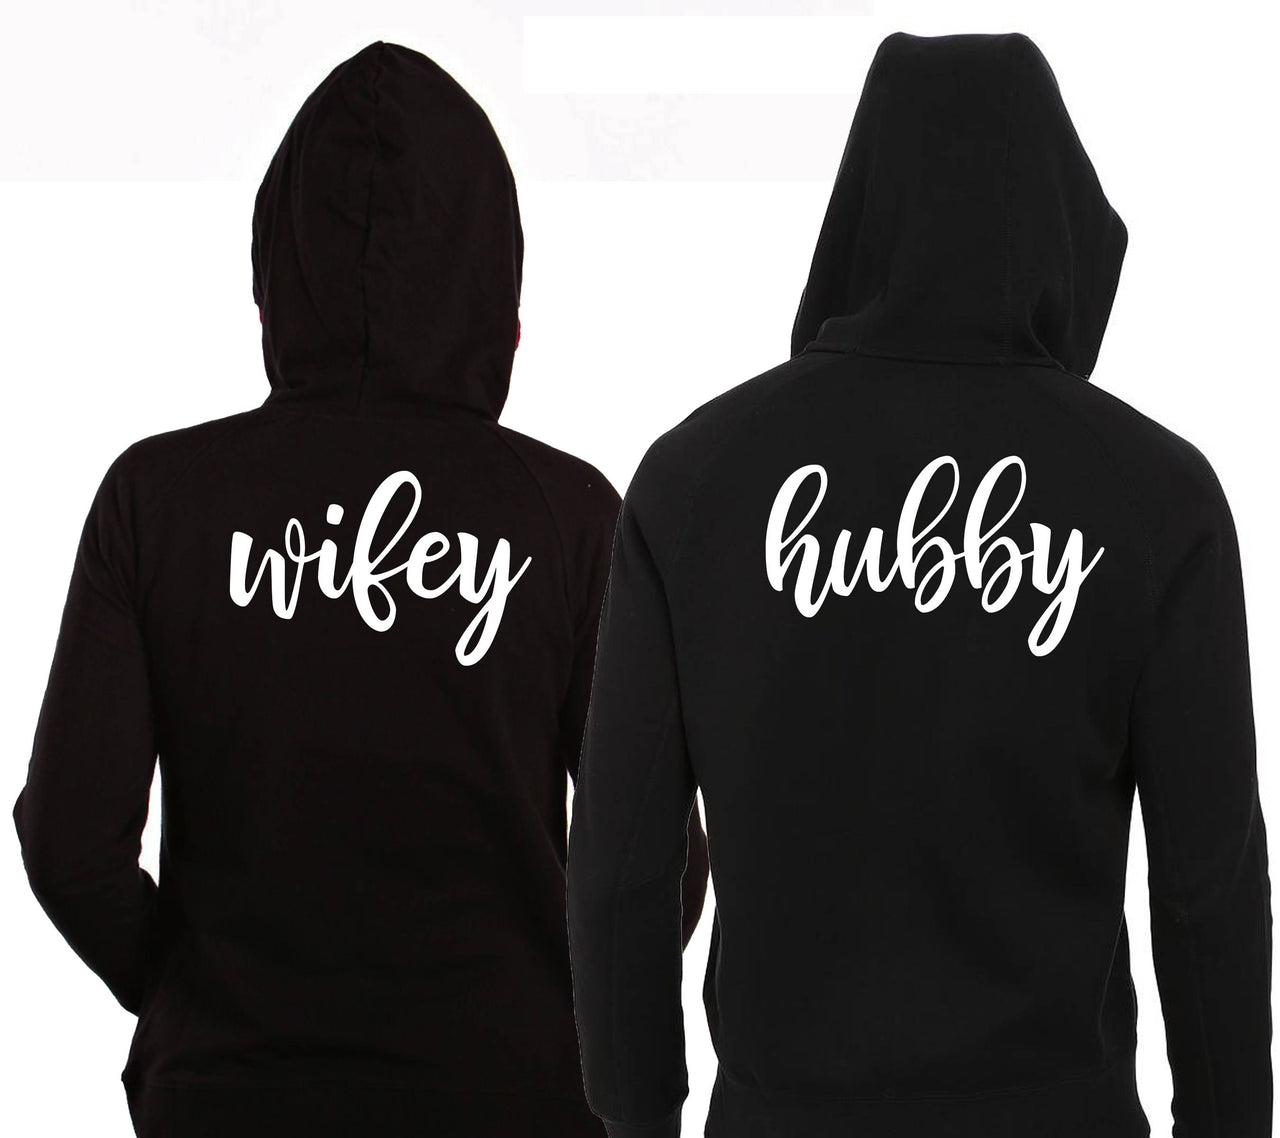 Hubby Wifey Couples Iron on Decals Hubby Wifey set heat transfer decals for wedding couples hoodies Hubby Vinyl Couples hoodie -CHT22HTV